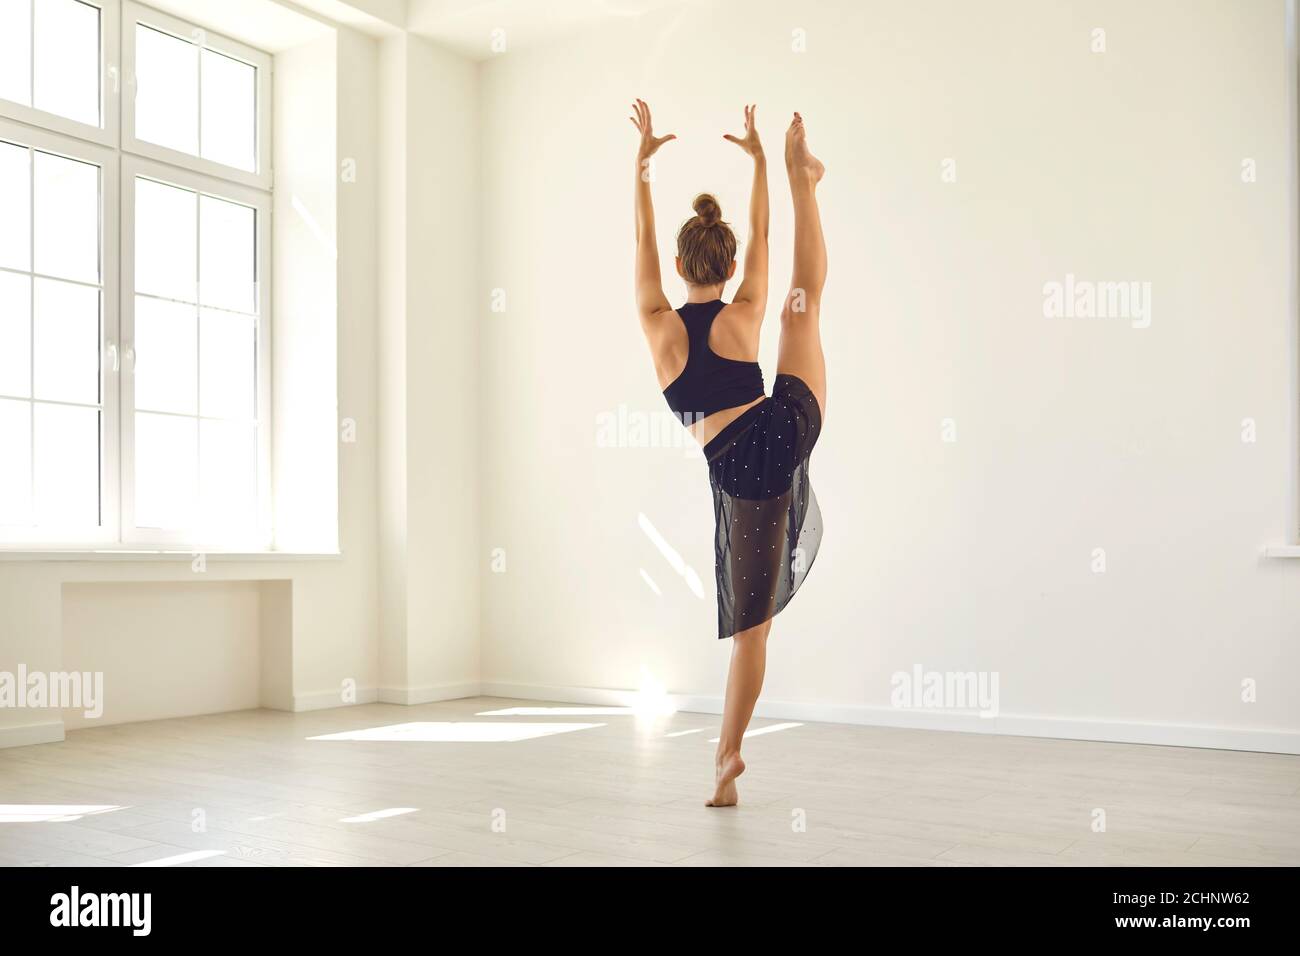 Fit woman in dancewear training her body and practicing standing side split in gym Stock Photo